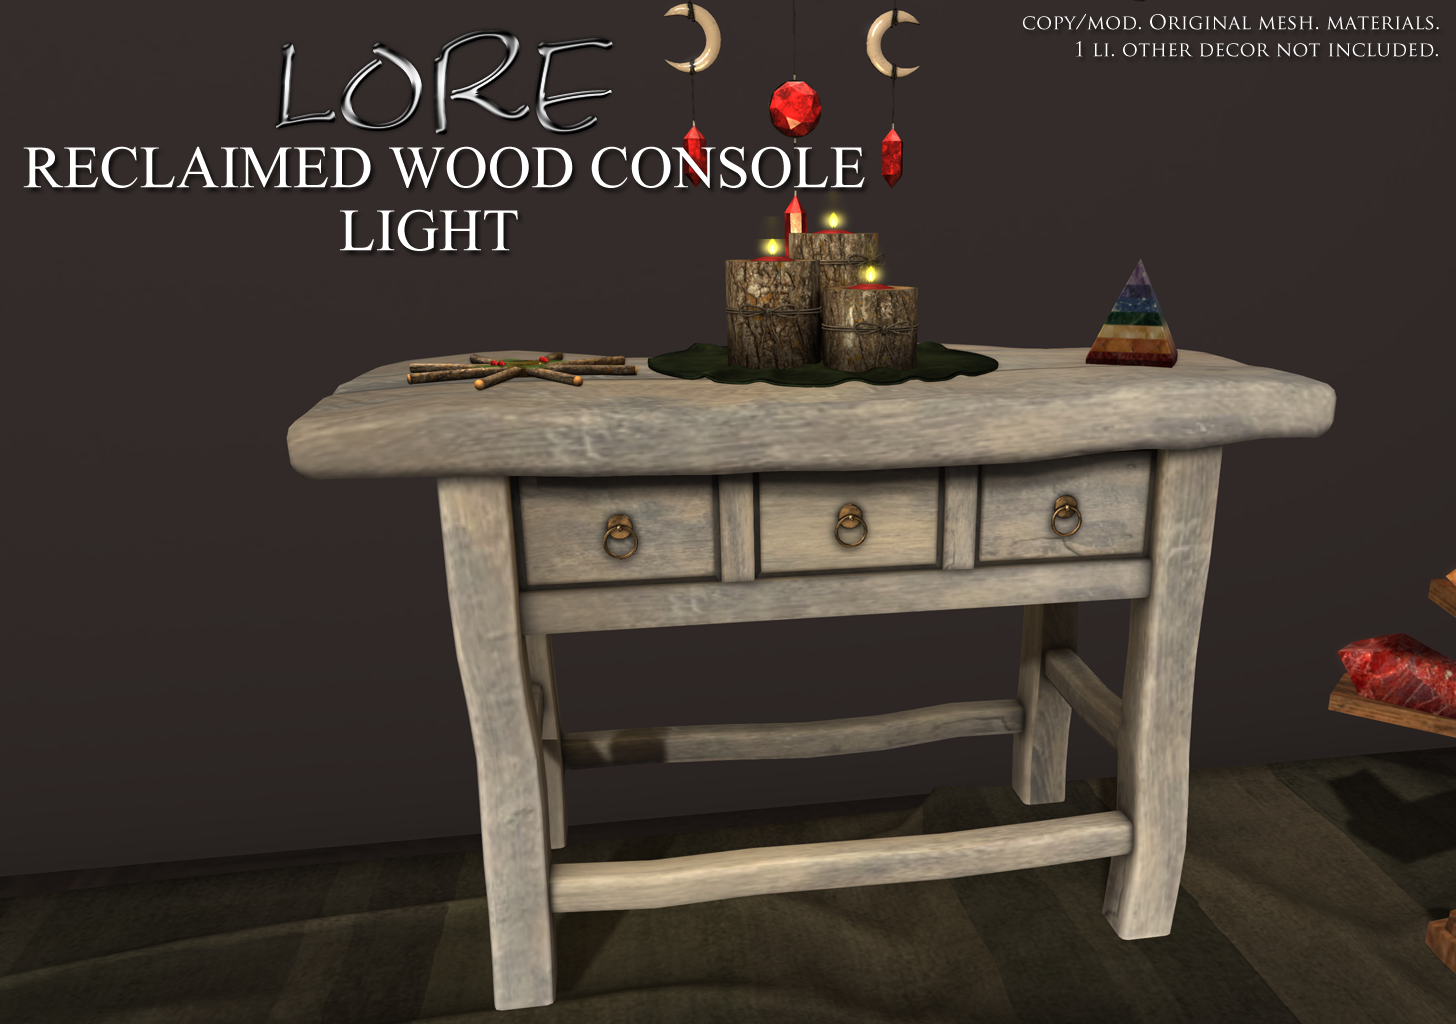 Reclaimed Wood Console Ad LIGHT